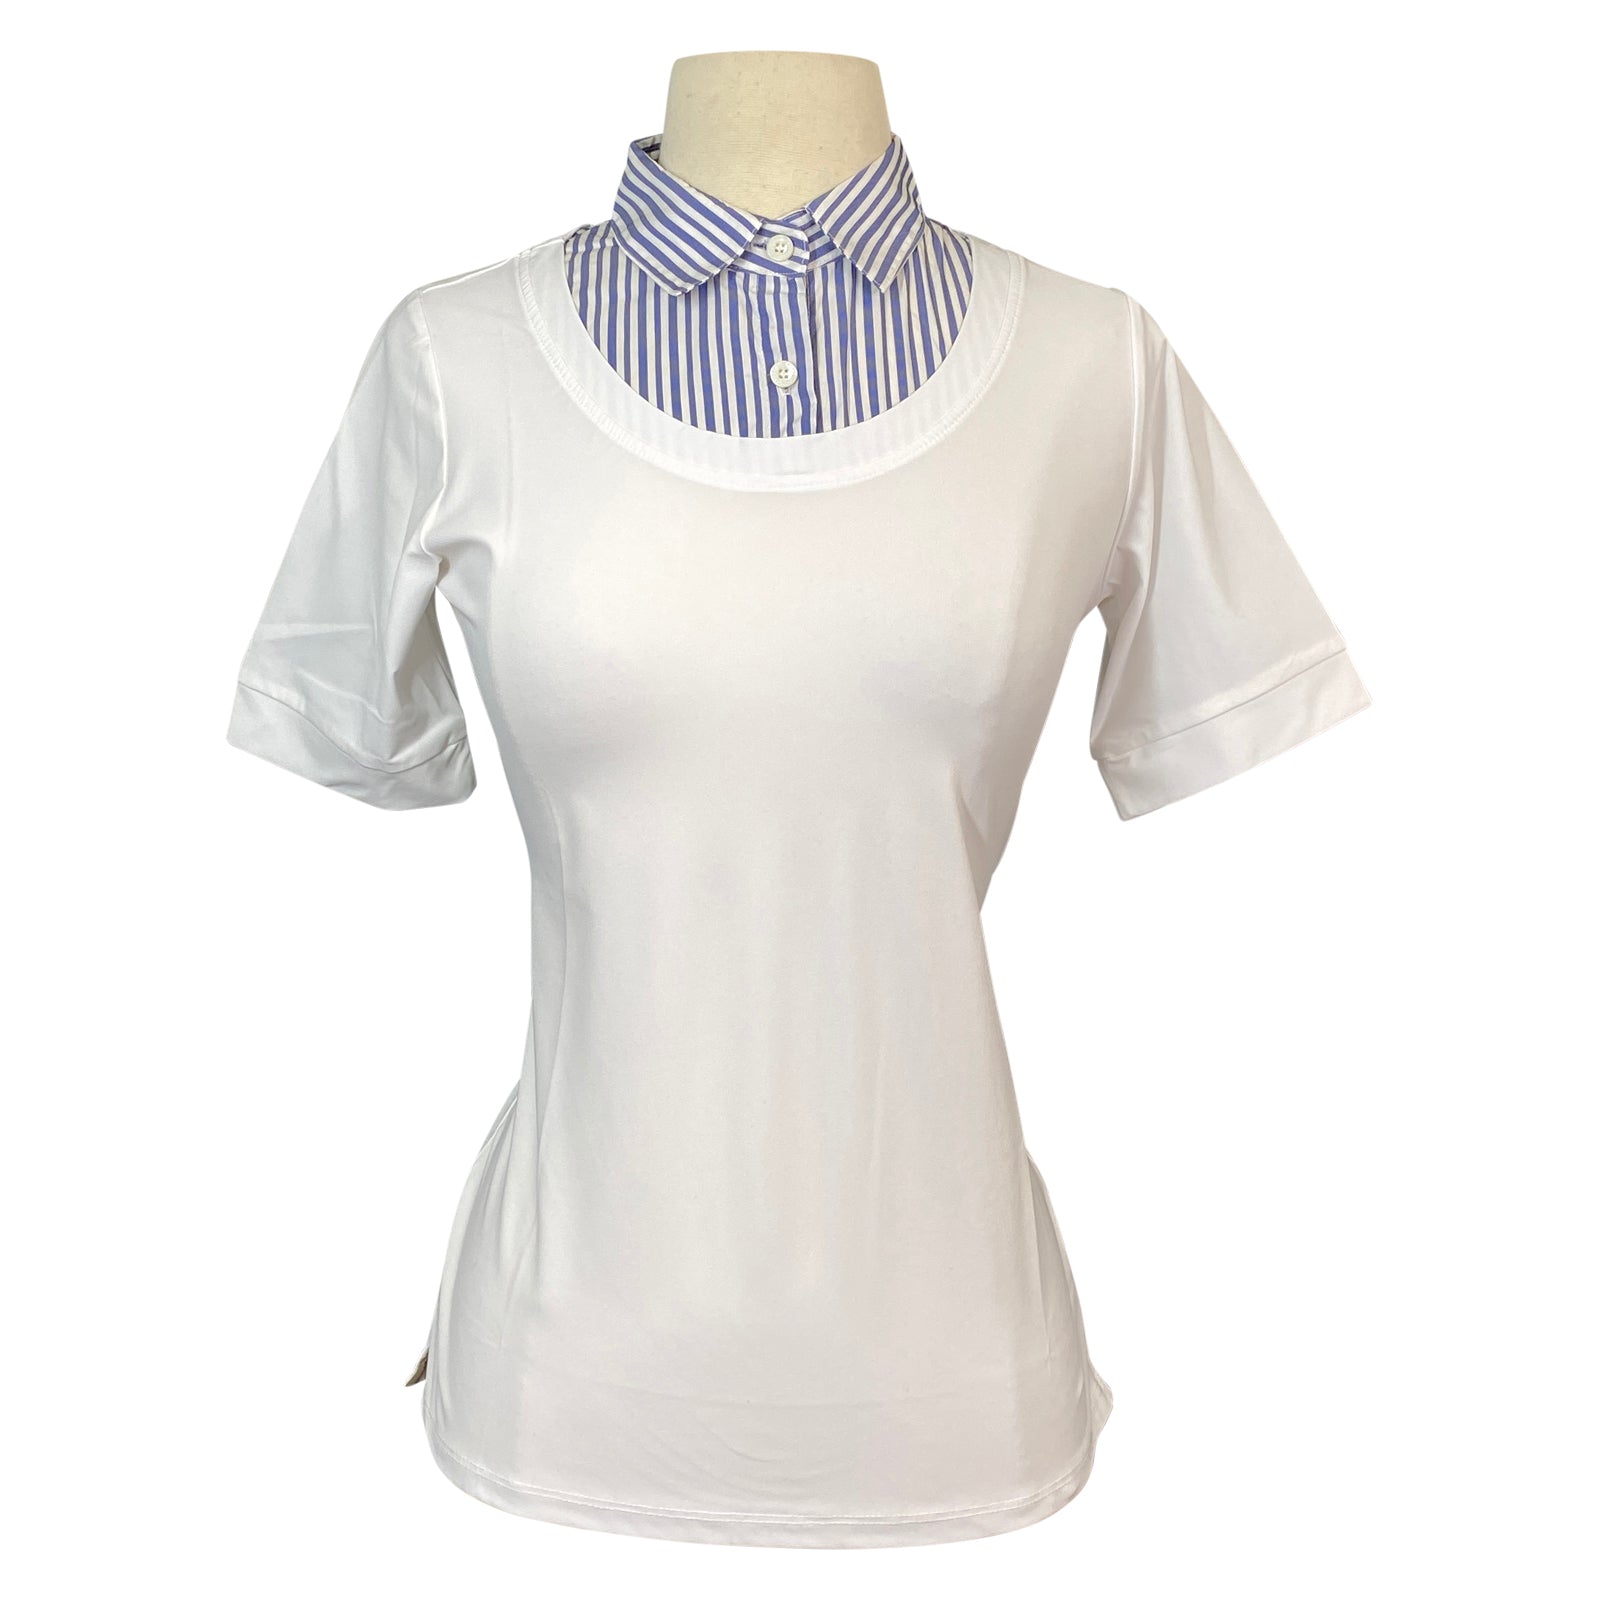 CALLIDAE The Practice Shirt in White w/ Fancy Stripe